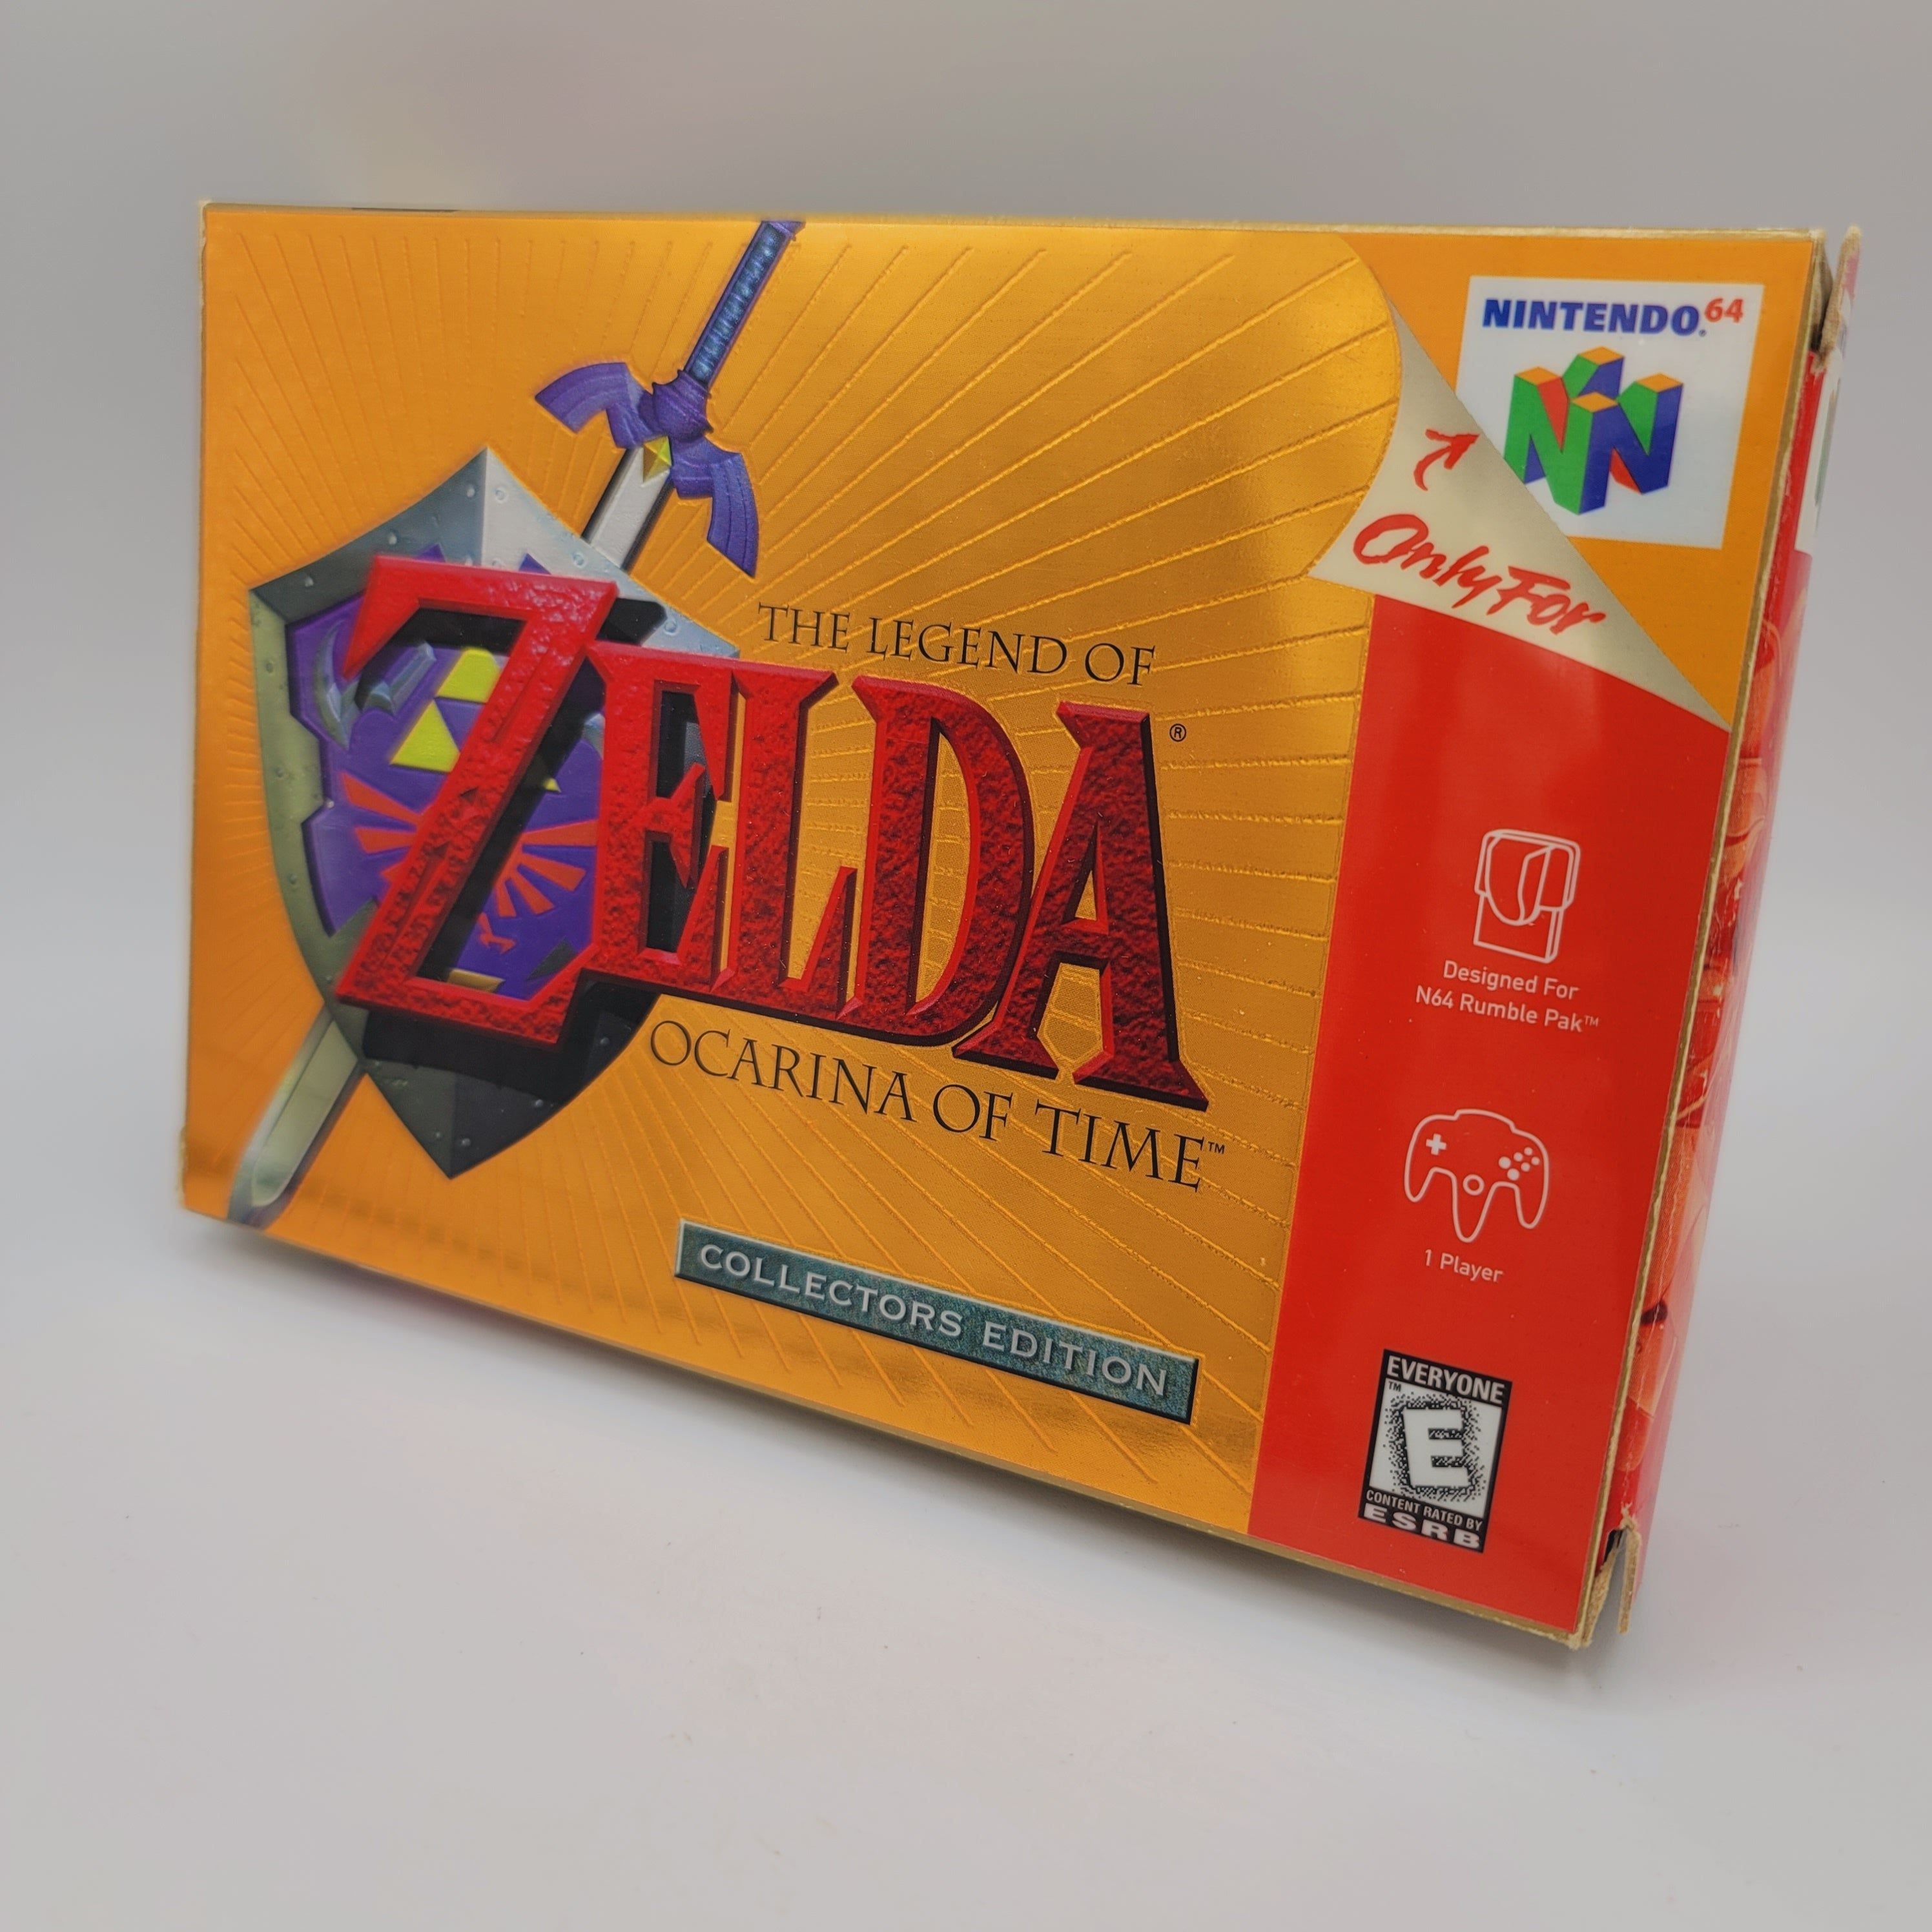 N64 - The Legend of Zelda Ocarina of Time Collectors Edition (Complete in Box / A / With Manual)